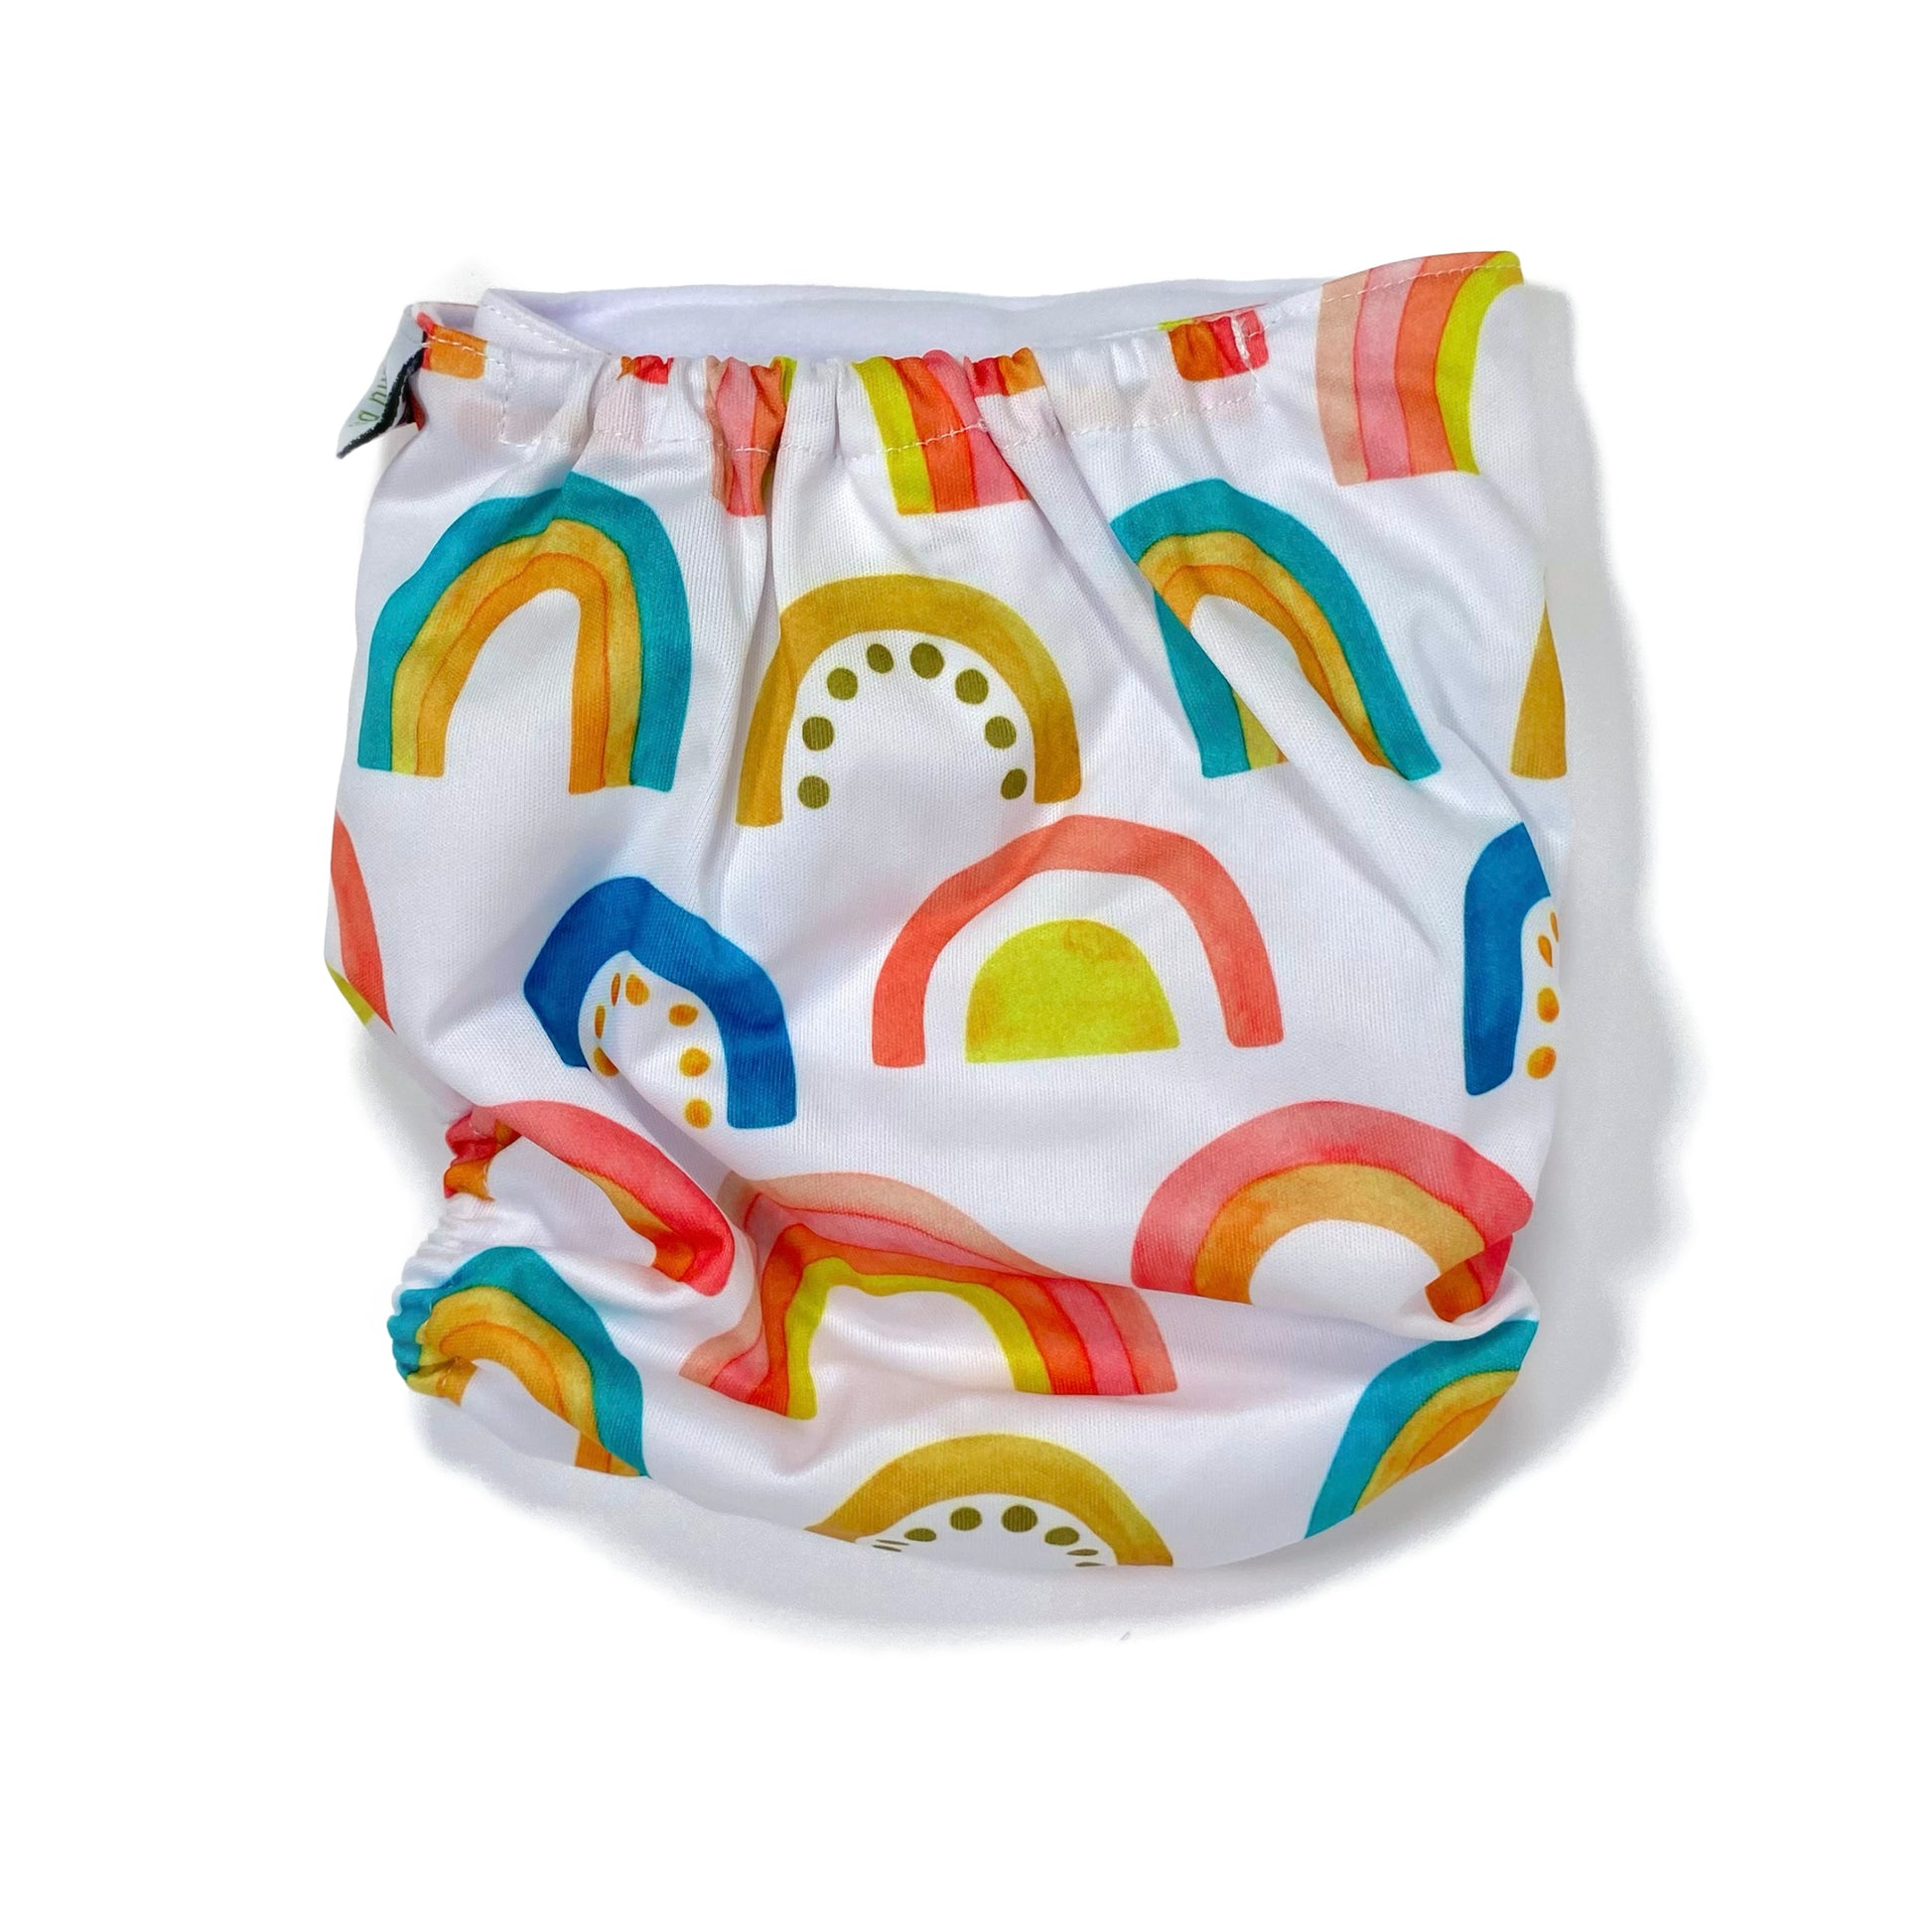 An adjustable reusable nappy for babies and toddlers, featuring a bright rainbow design, with brightly coloured rainbows on a white background. View shows the back of the nappy. 